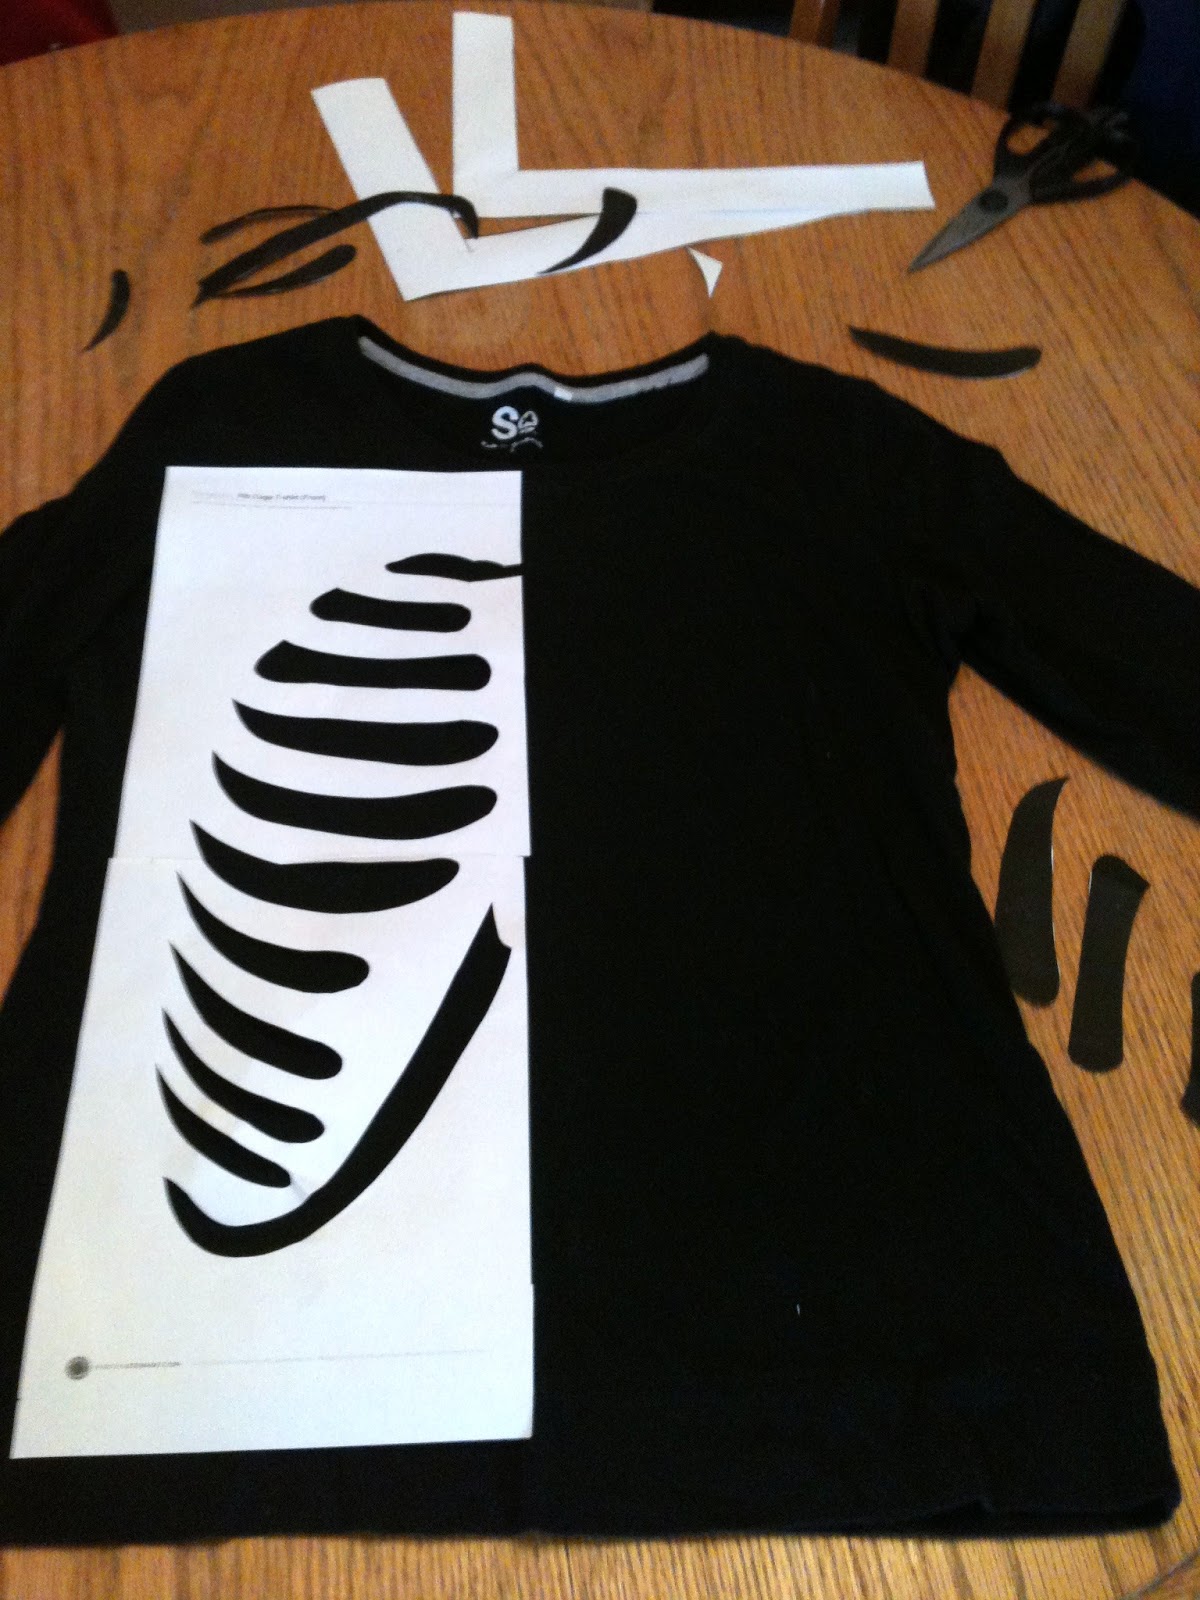 Skeleton T Shirt Cut Out Template